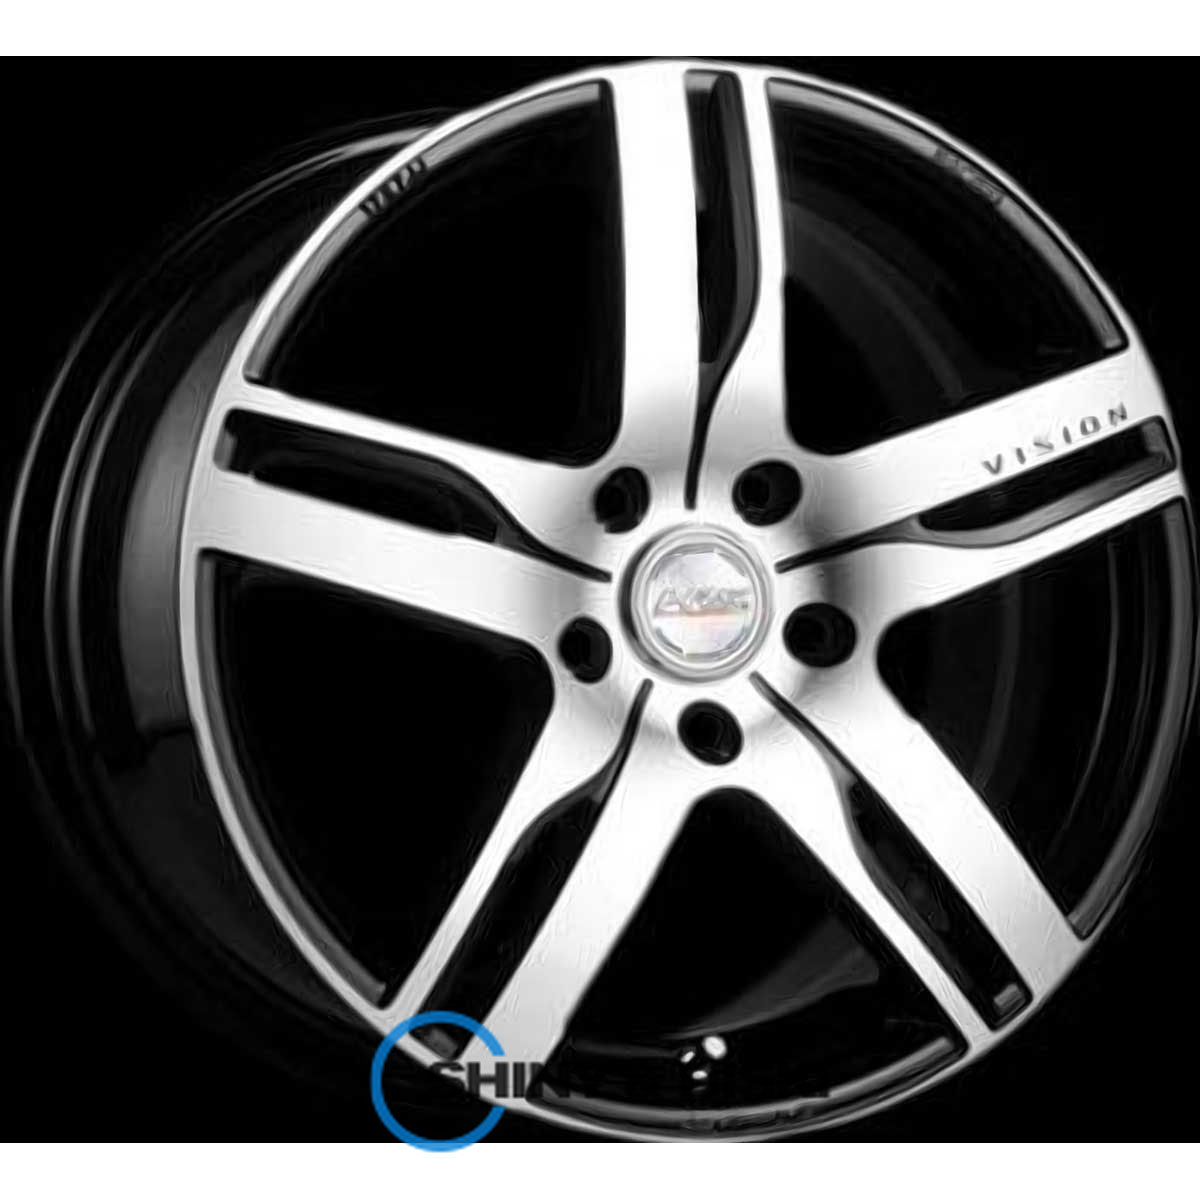 rs tuning h-459 bkfp r14 w6 pcd4x98 et38 dia58.6